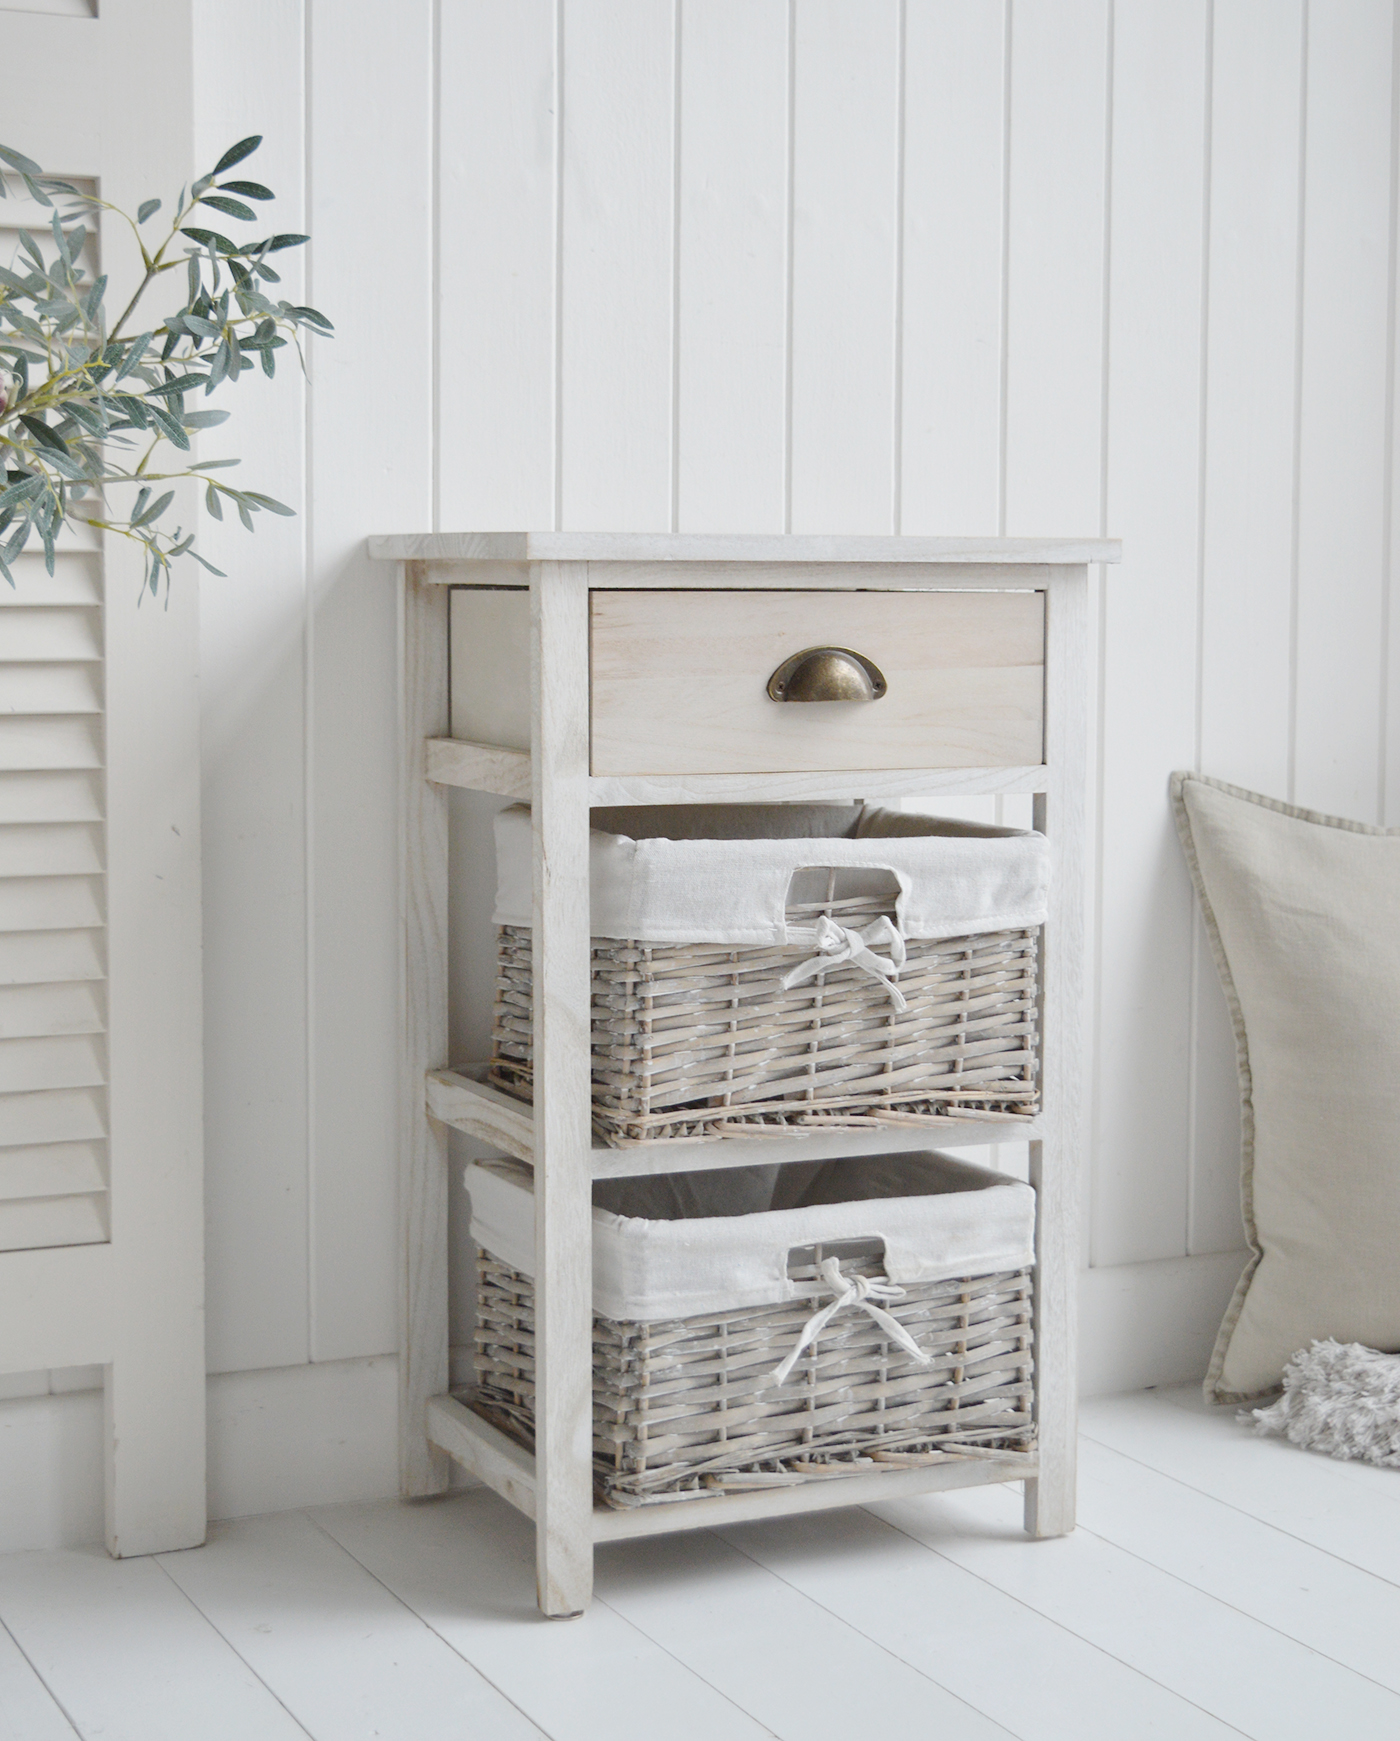 Dorset Cabinet with 3 Drawers in light grey washed wood - New England Coastal and Modern Country Furniture. Storage furniture with baskets, an ideal lamp table for the hallway